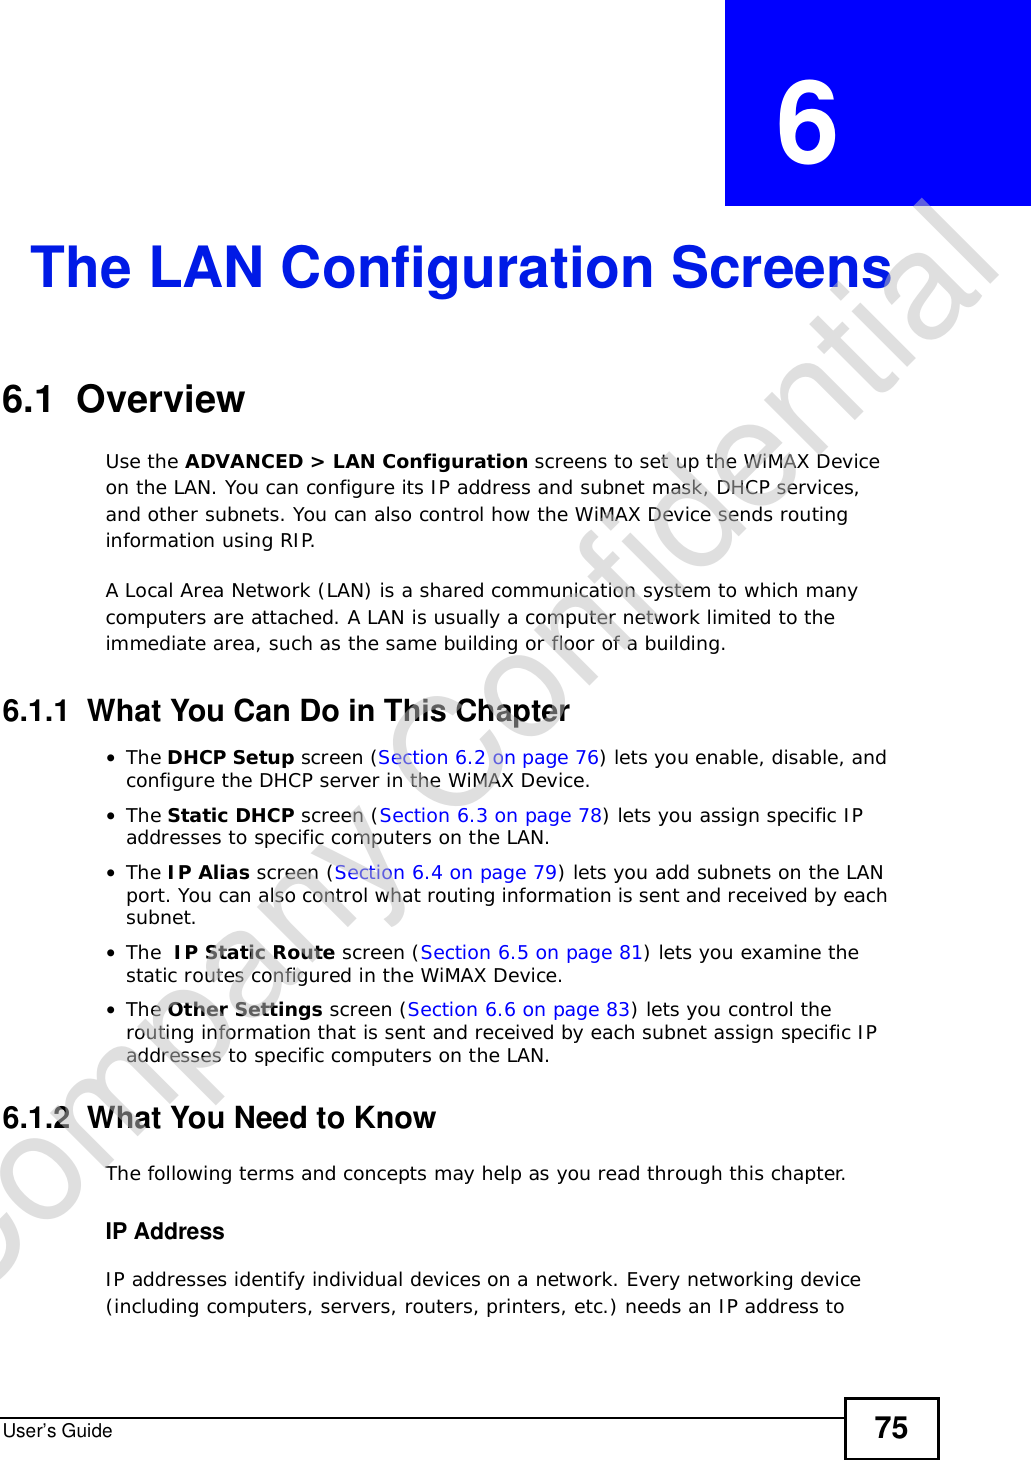 User’s Guide 75CHAPTER  6 The LAN Configuration Screens6.1  OverviewUse the ADVANCED &gt; LAN Configuration screens to set up the WiMAX Device on the LAN. You can configure its IP address and subnet mask, DHCP services, and other subnets. You can also control how the WiMAX Device sends routing information using RIP.A Local Area Network (LAN) is a shared communication system to which many computers are attached. A LAN is usually a computer network limited to the immediate area, such as the same building or floor of a building.6.1.1  What You Can Do in This Chapter•The DHCP Setup screen (Section 6.2 on page 76) lets you enable, disable, and configure the DHCP server in the WiMAX Device.•The Static DHCP screen (Section 6.3 on page 78) lets you assign specific IP addresses to specific computers on the LAN.•The IP Alias screen (Section 6.4 on page 79) lets you add subnets on the LAN port. You can also control what routing information is sent and received by each subnet.•The  IP Static Route screen (Section 6.5 on page 81) lets you examine the static routes configured in the WiMAX Device.•The Other Settings screen (Section 6.6 on page 83) lets you control the routing information that is sent and received by each subnet assign specific IP addresses to specific computers on the LAN.6.1.2  What You Need to KnowThe following terms and concepts may help as you read through this chapter.IP AddressIP addresses identify individual devices on a network. Every networking device (including computers, servers, routers, printers, etc.) needs an IP address to Company Confidential